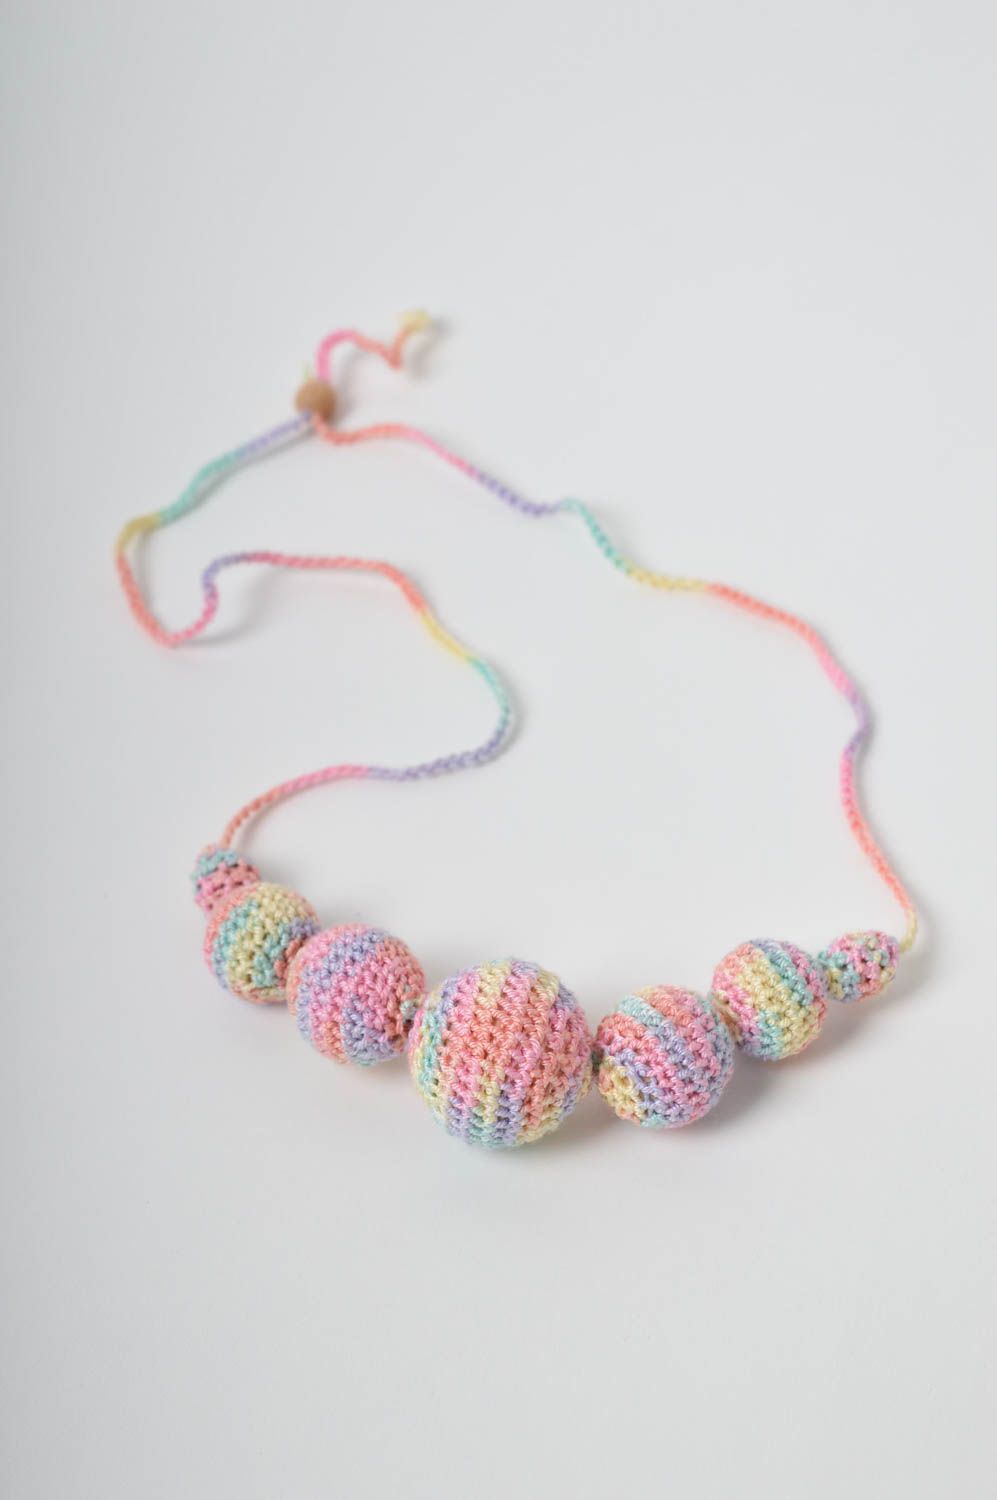 Handmade babywearing necklace crochet ball necklace soft necklace for babies photo 2